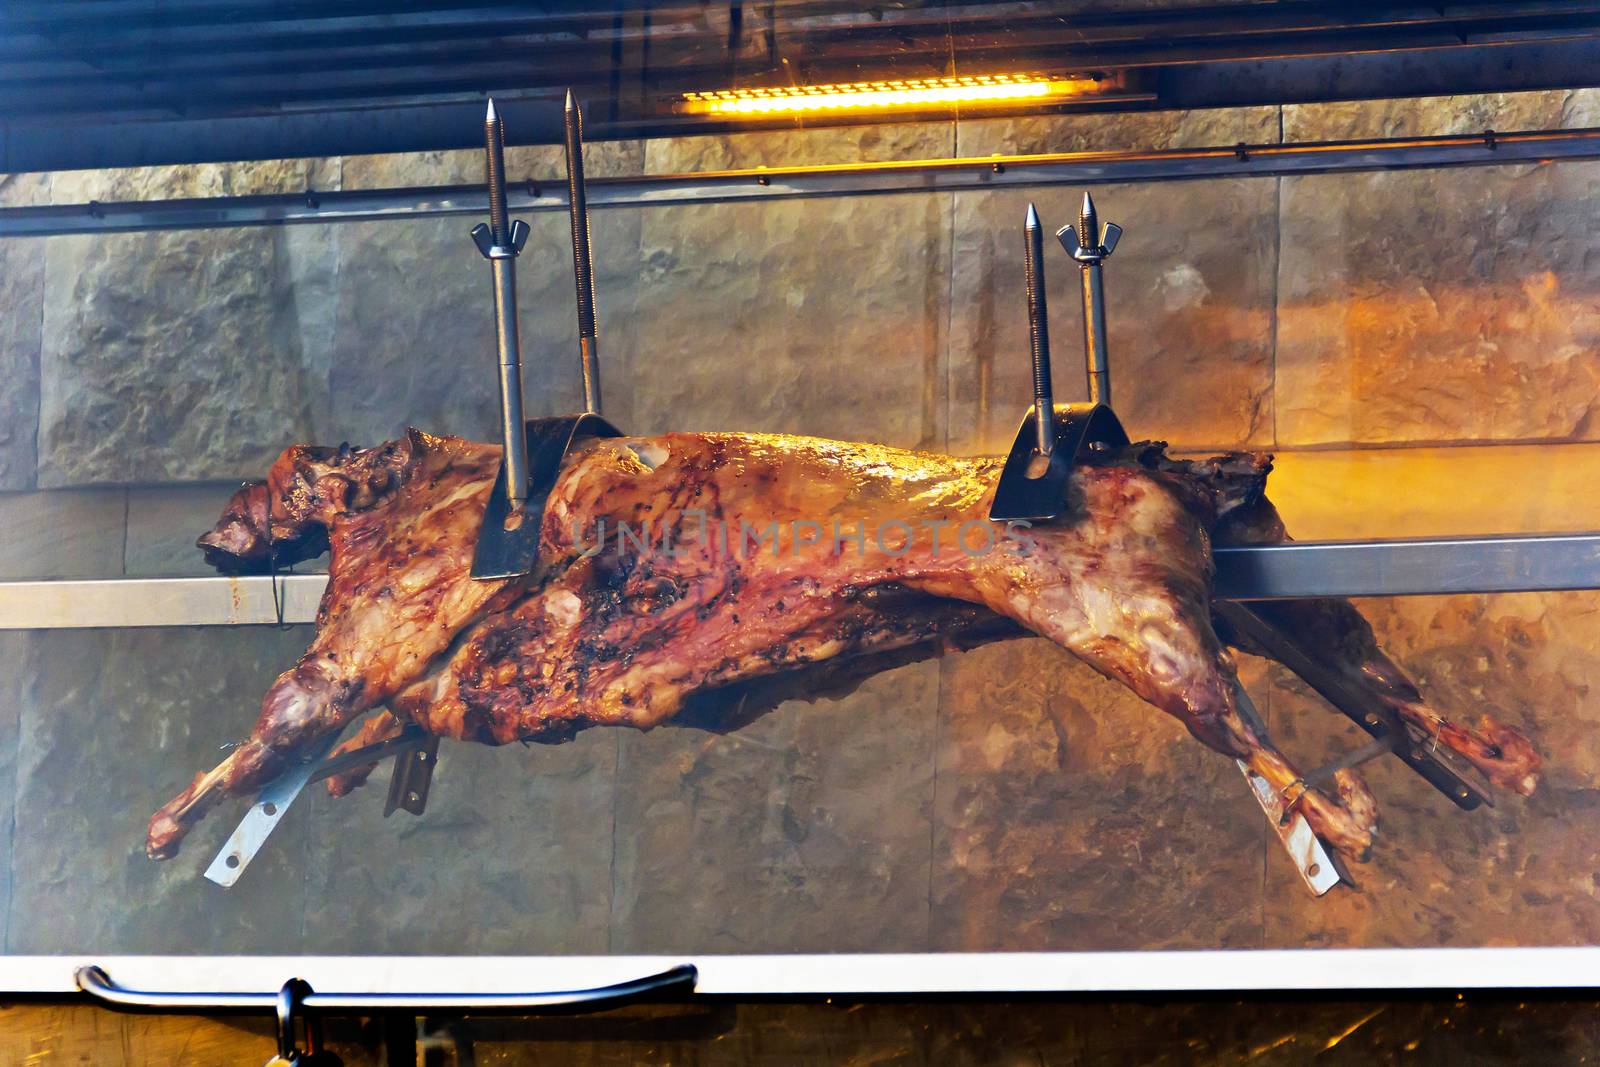 Lamb carcass on skewer behind glass in oven